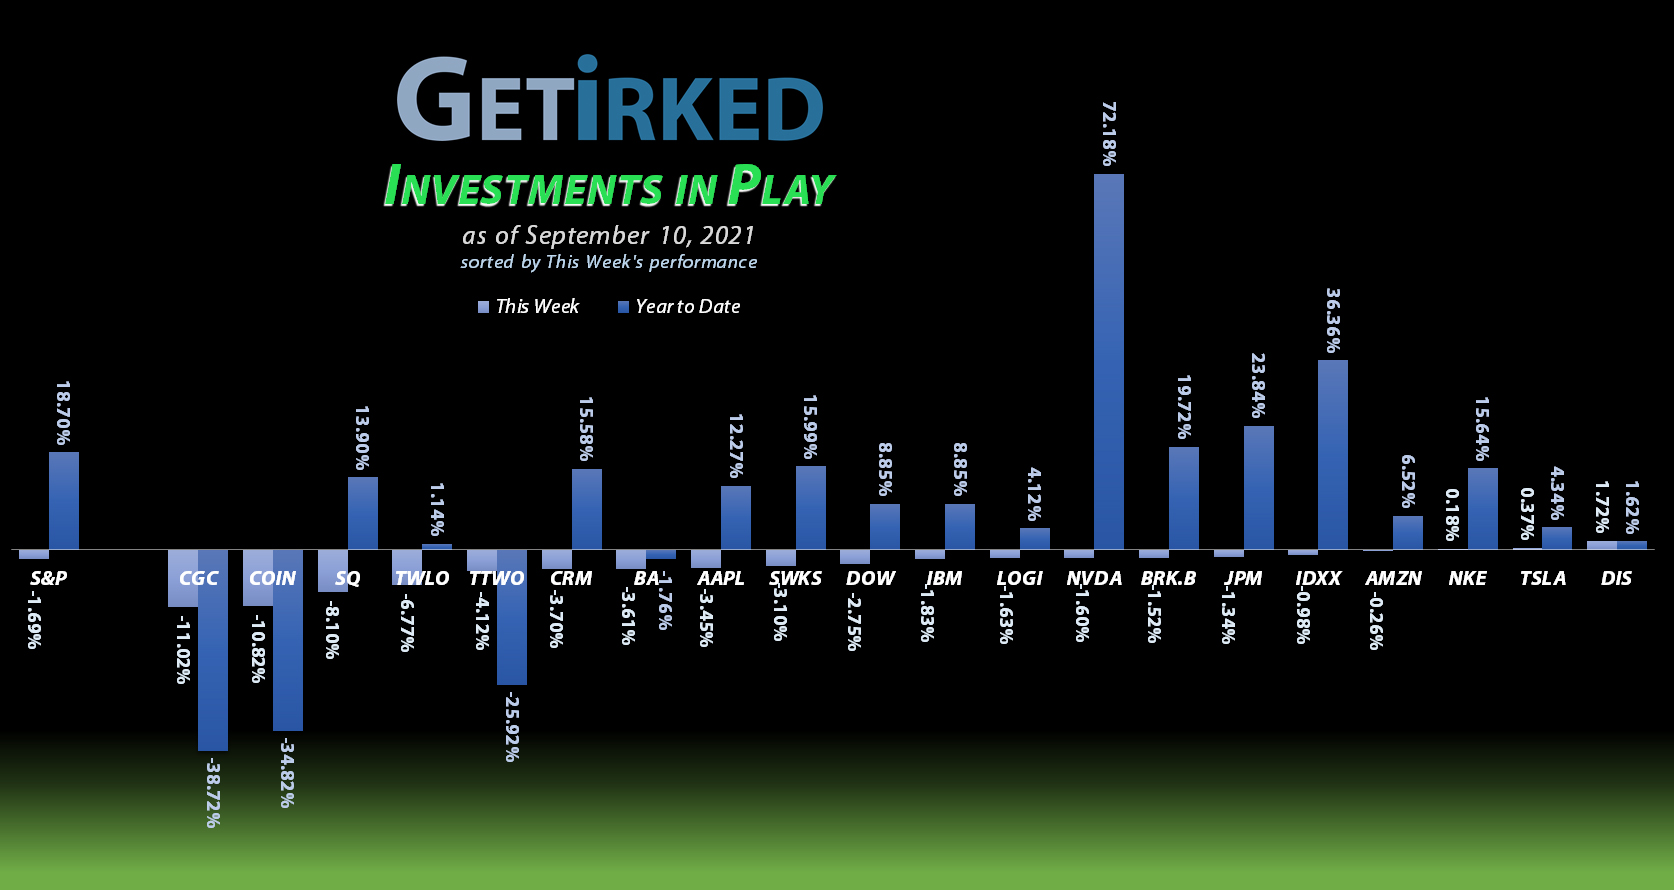 Get Irked - Investments in Play - September 10, 2021